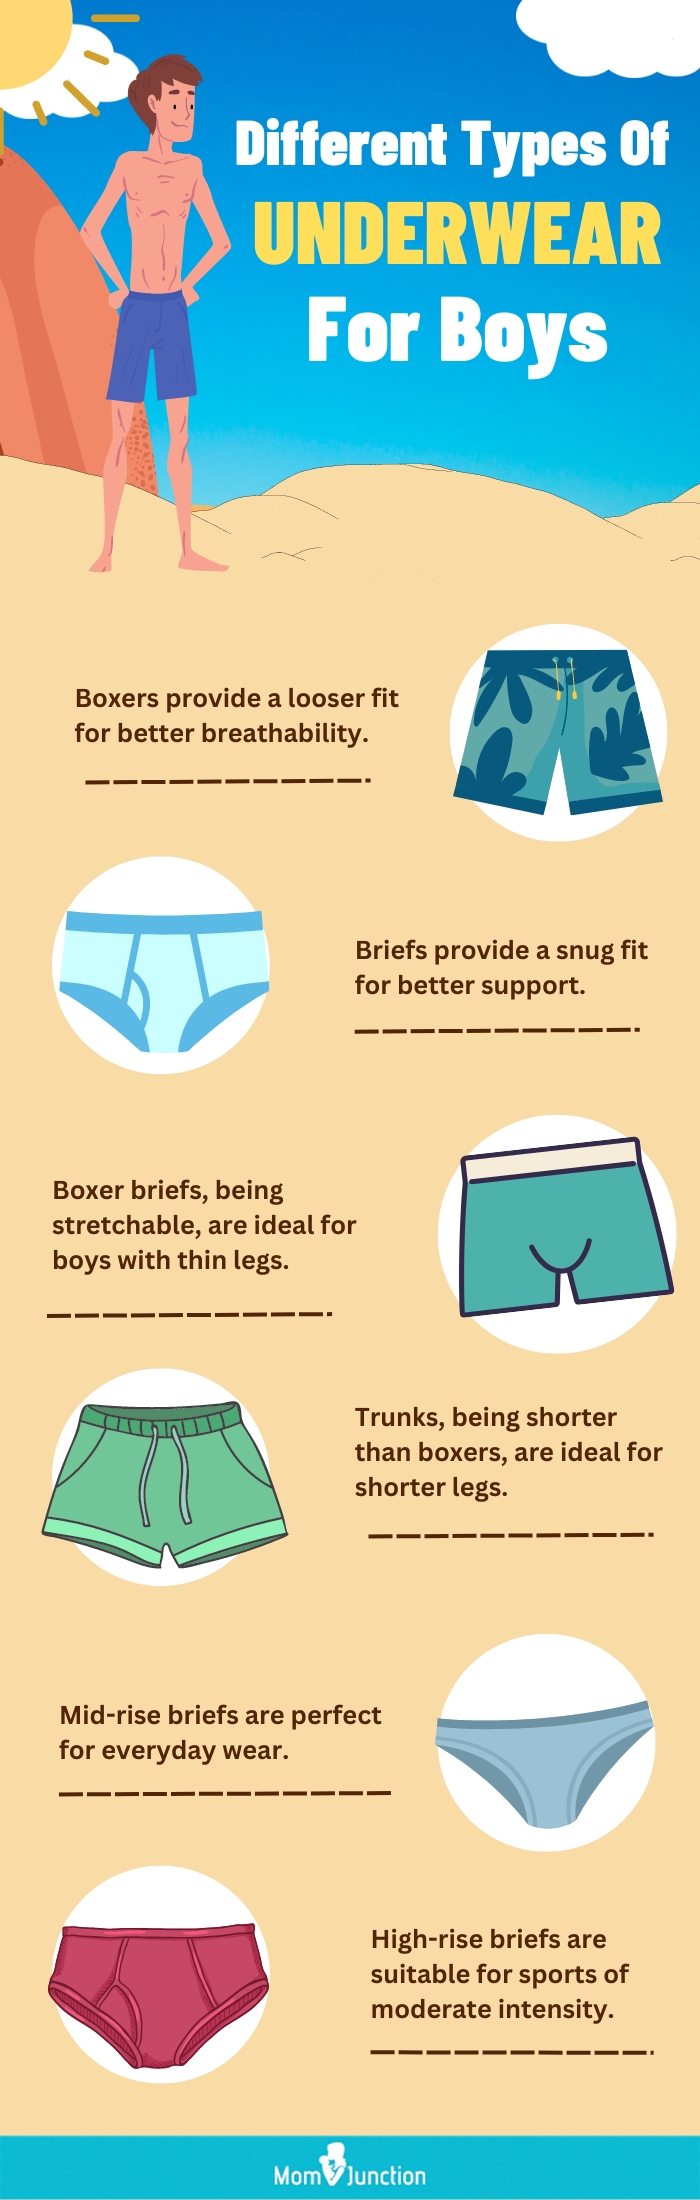 Different Types Of Underwear For Boys (infographic)